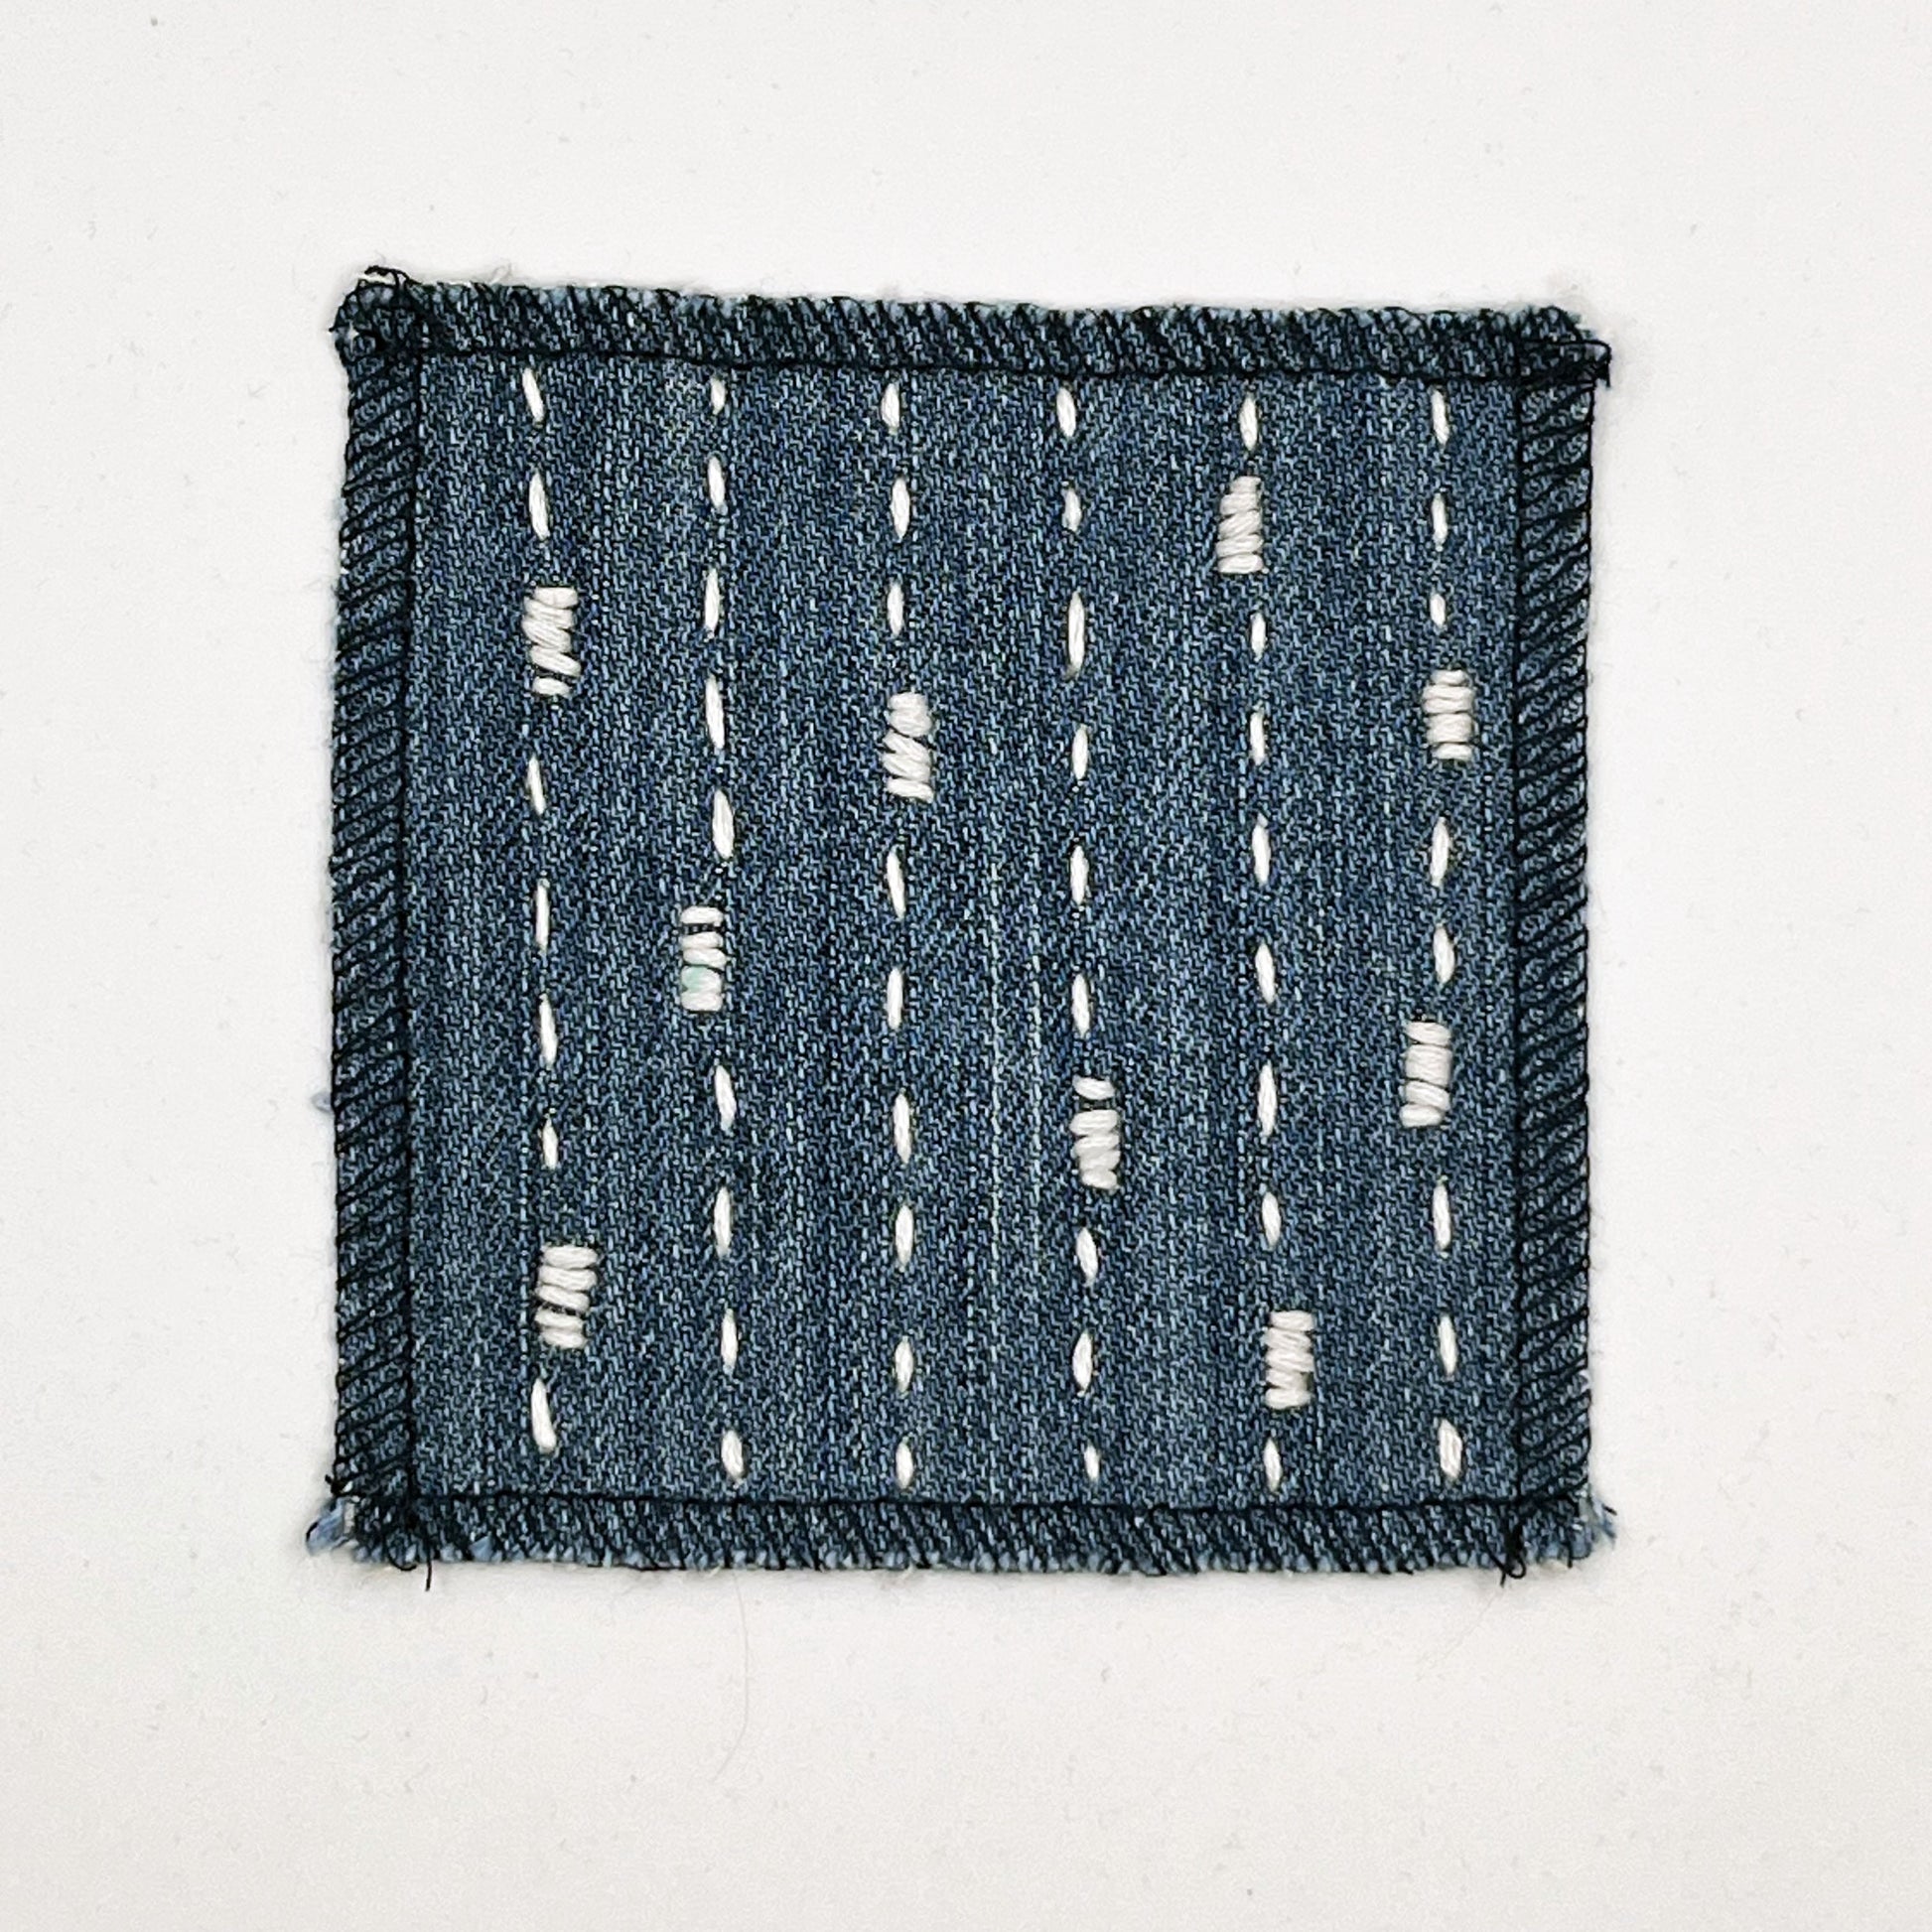 a square patch made out of denim, handstitched with ivory running stitches with randomly placed small rectangles made of stitches running the other direction, with overlocked edges, on a white background